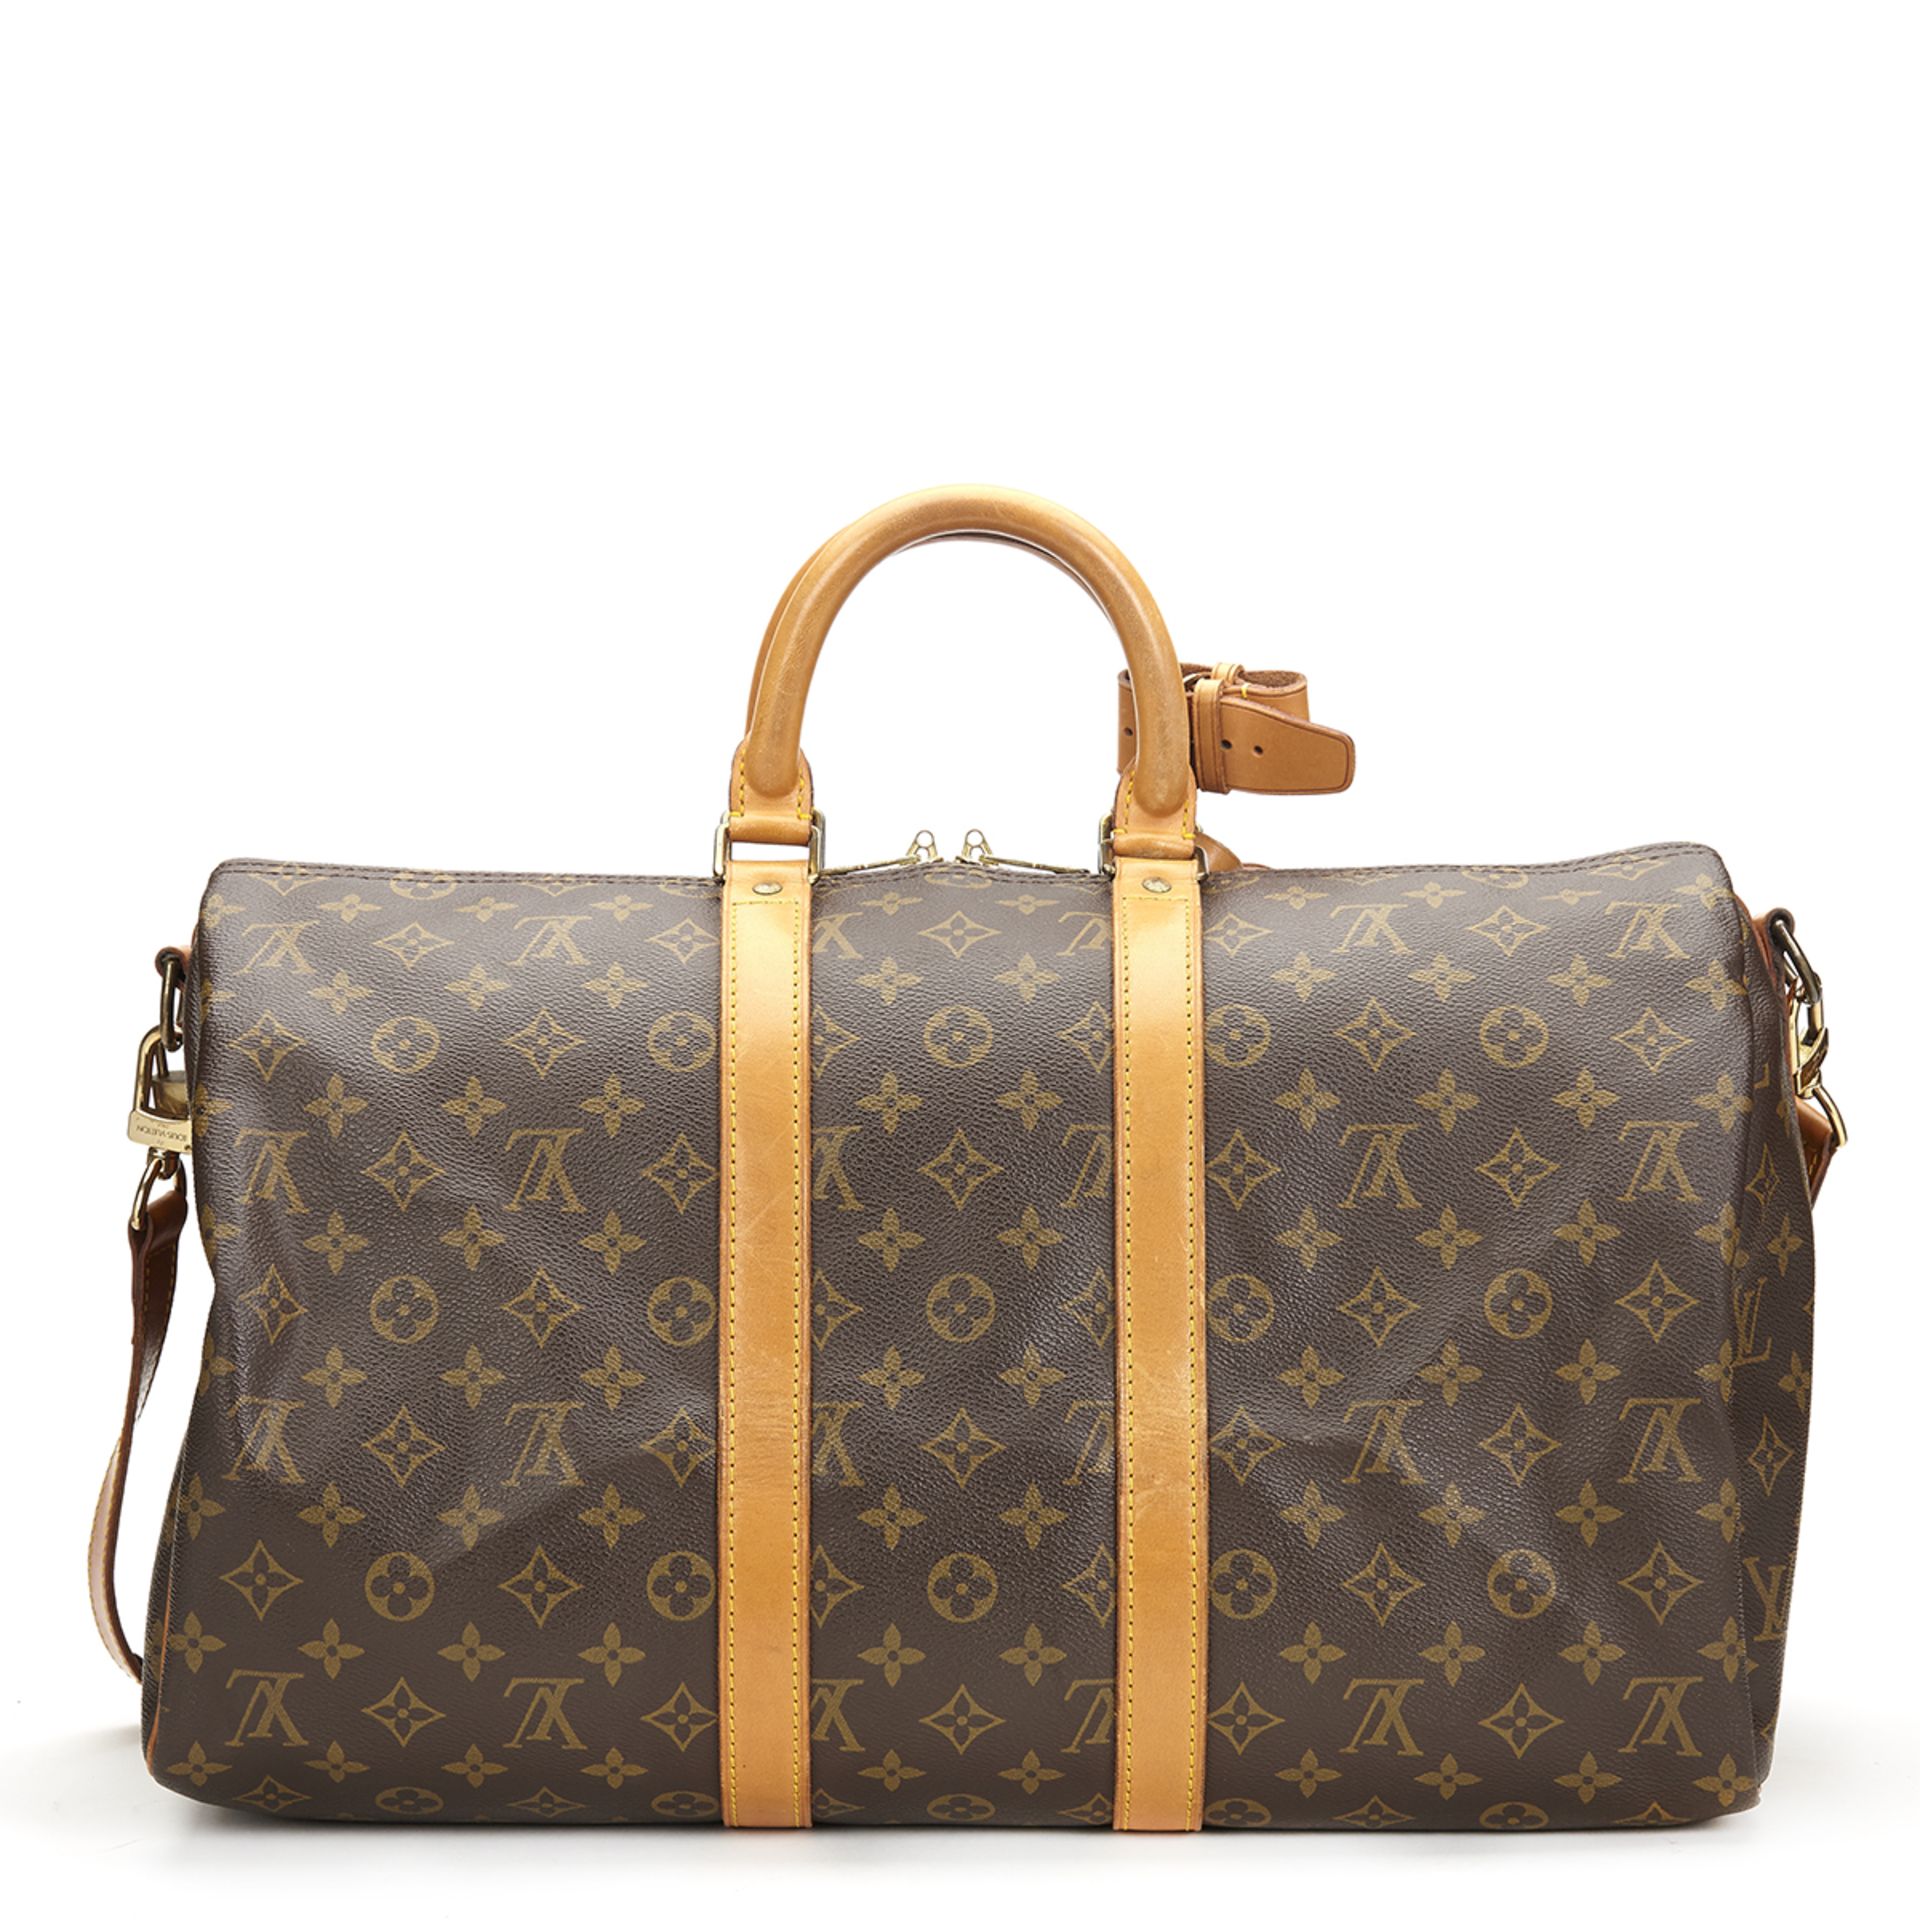 Louis Vuitton, Keepall Bandouliere 45 - Image 4 of 7